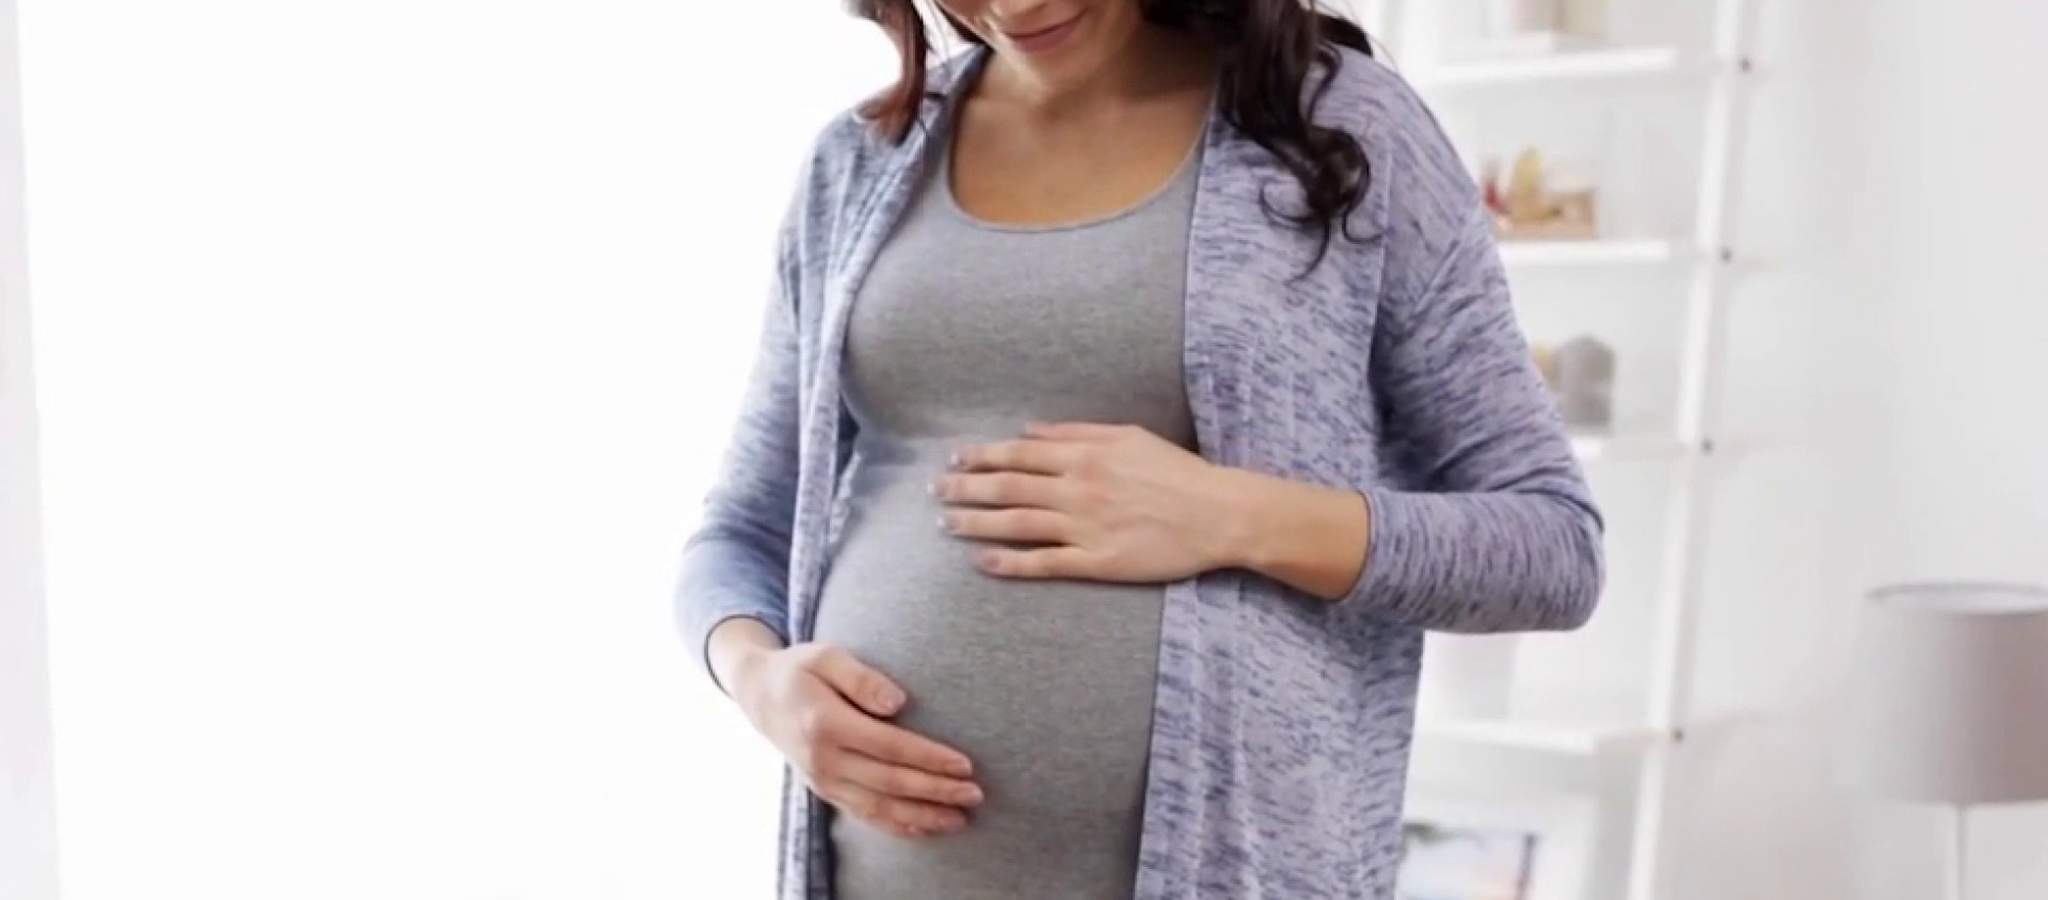 When pregnant moms get COVID-19 vaccine, can they pass protection to their baby?